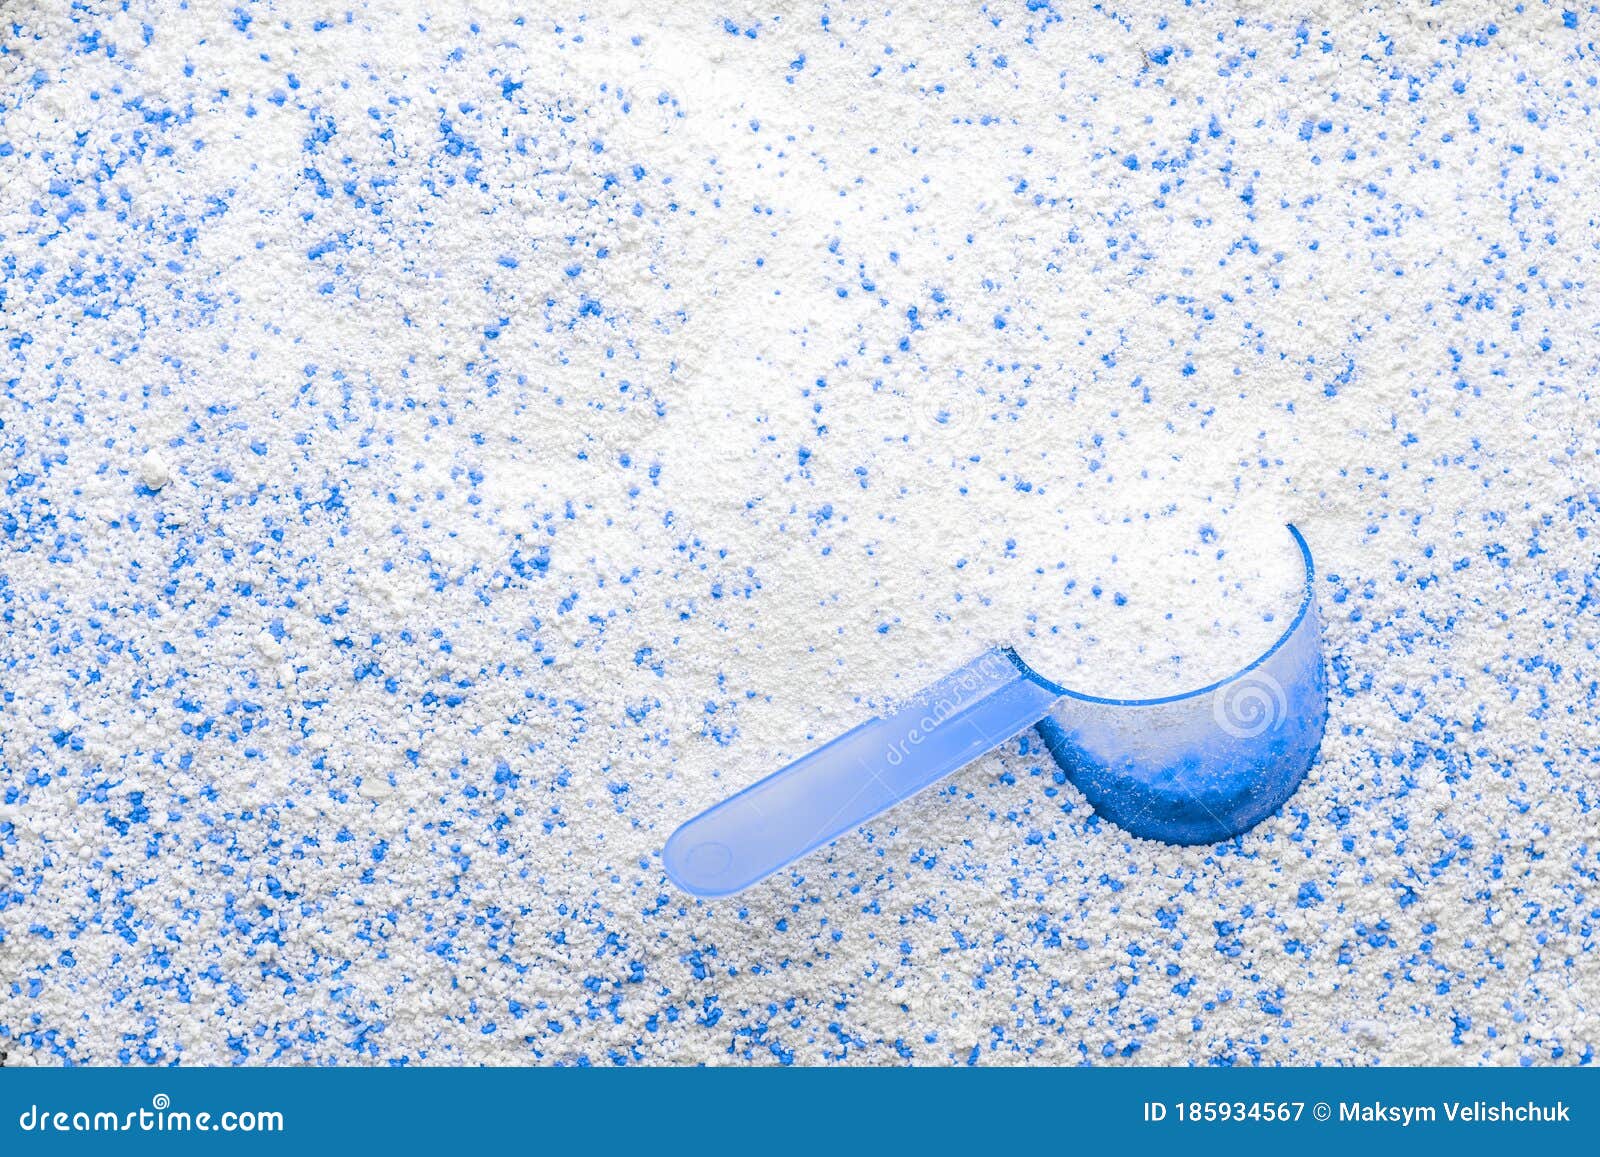 Detergent Powder. White Wash Soap Texture with Cup for Laundry Background.  Liquid Soap in Scoop for Machine Stock Image - Image of laundromat, powder:  185934567